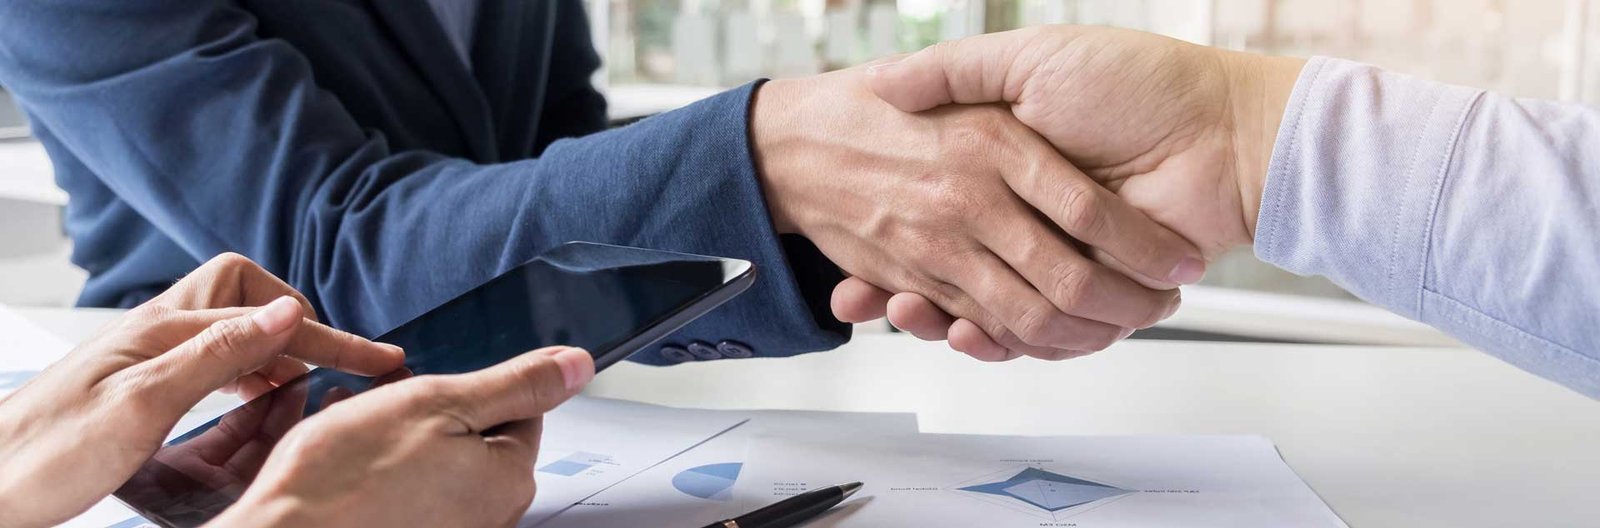 in raise business handshake of two men demonstrating their agreement to sign agreement or contract between their firms companies enterprises